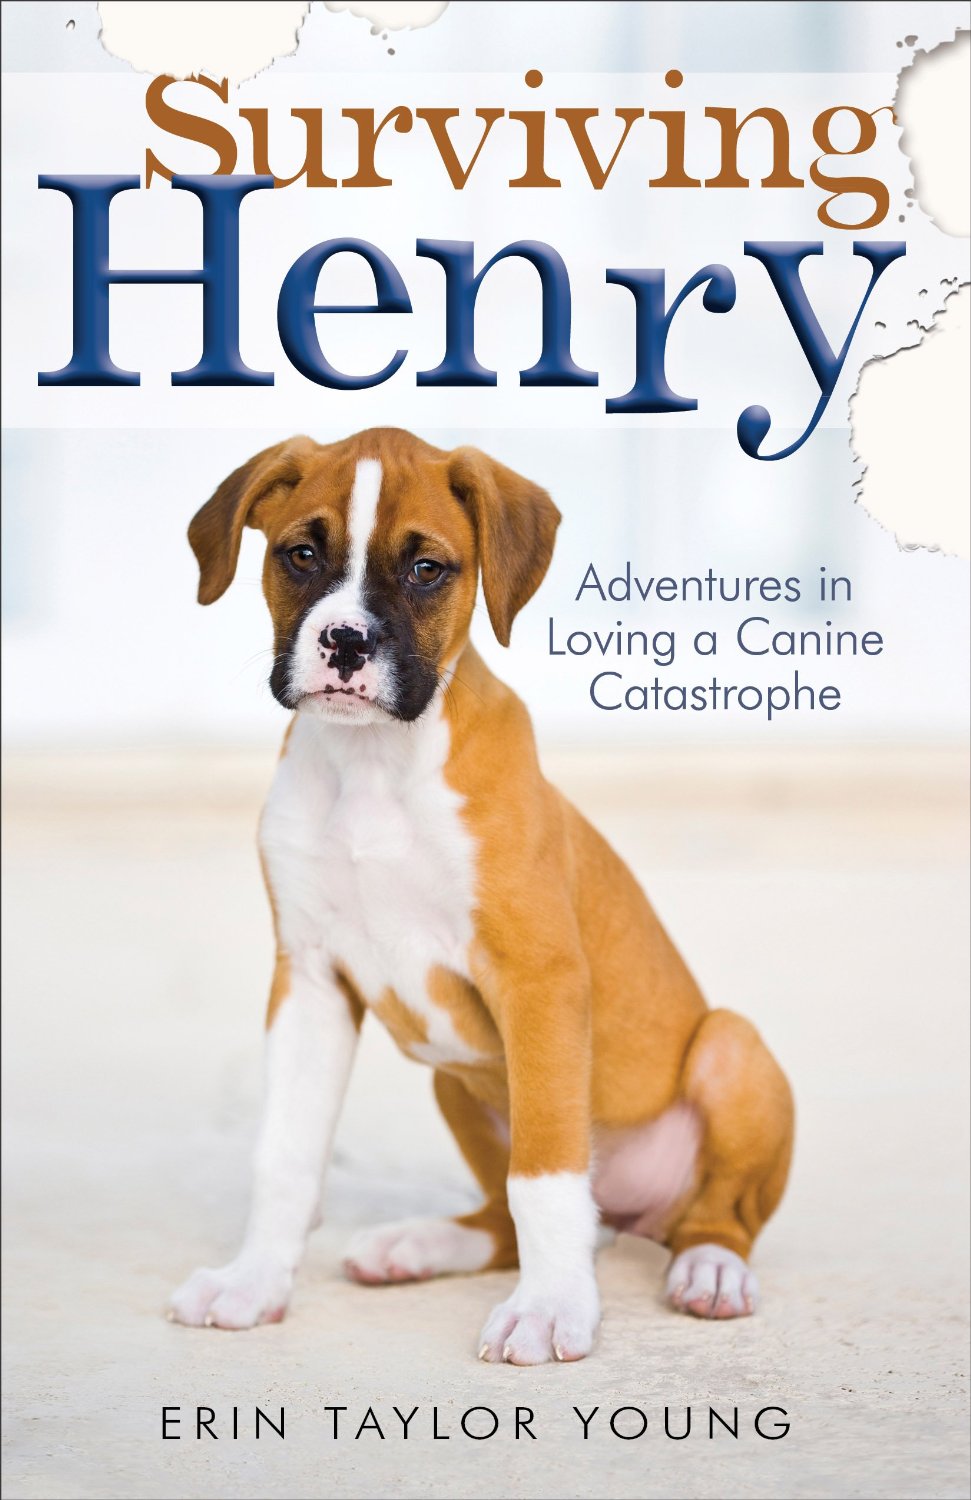 Book Trailer of the Week: Henry and the Bouncing Ball by Surviving Henry